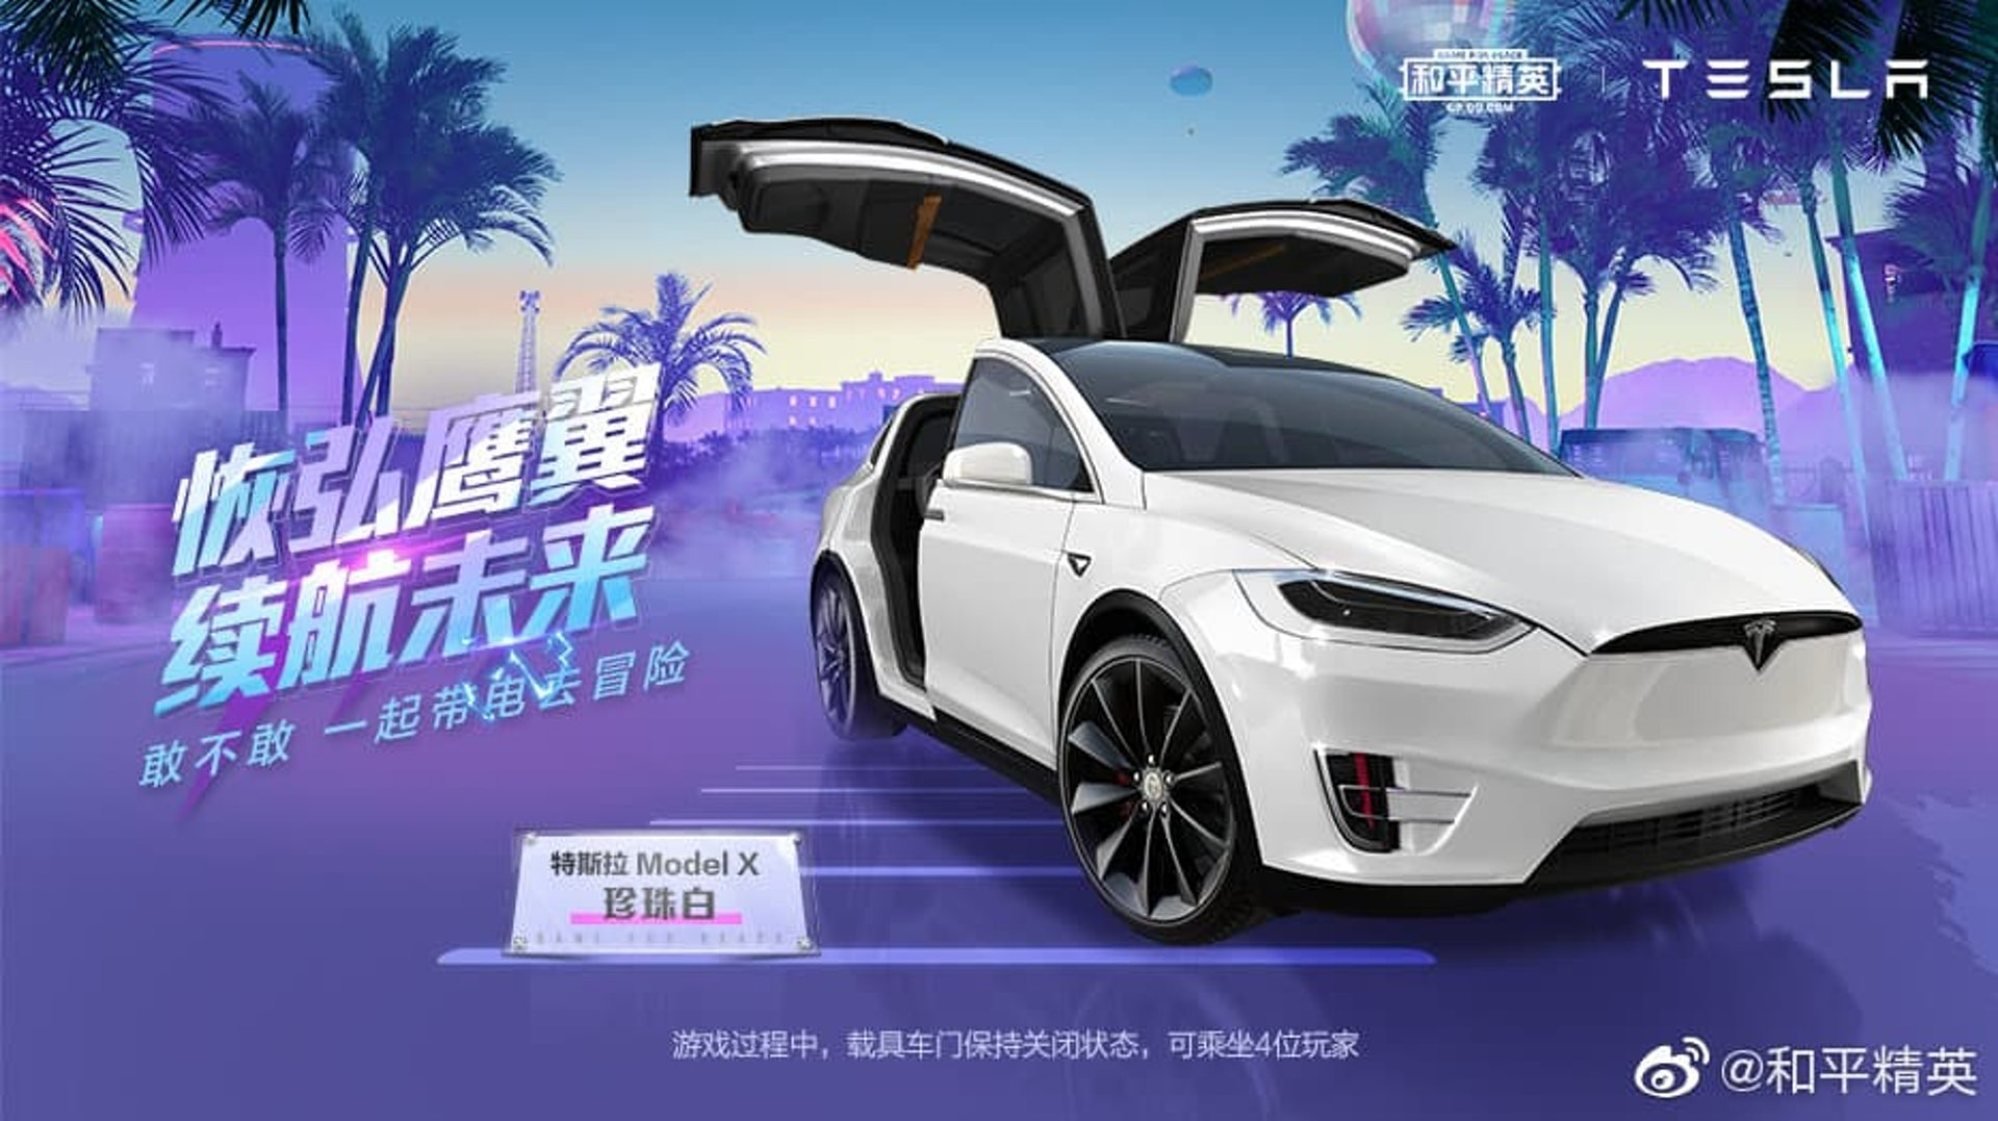 In a collaboration with Tencent, a Tesla Model X car is featured in Peacekeeper Elite, the Chinese version of hit battle royale game PUBG Mobile. Photo: Tencent/Tesla